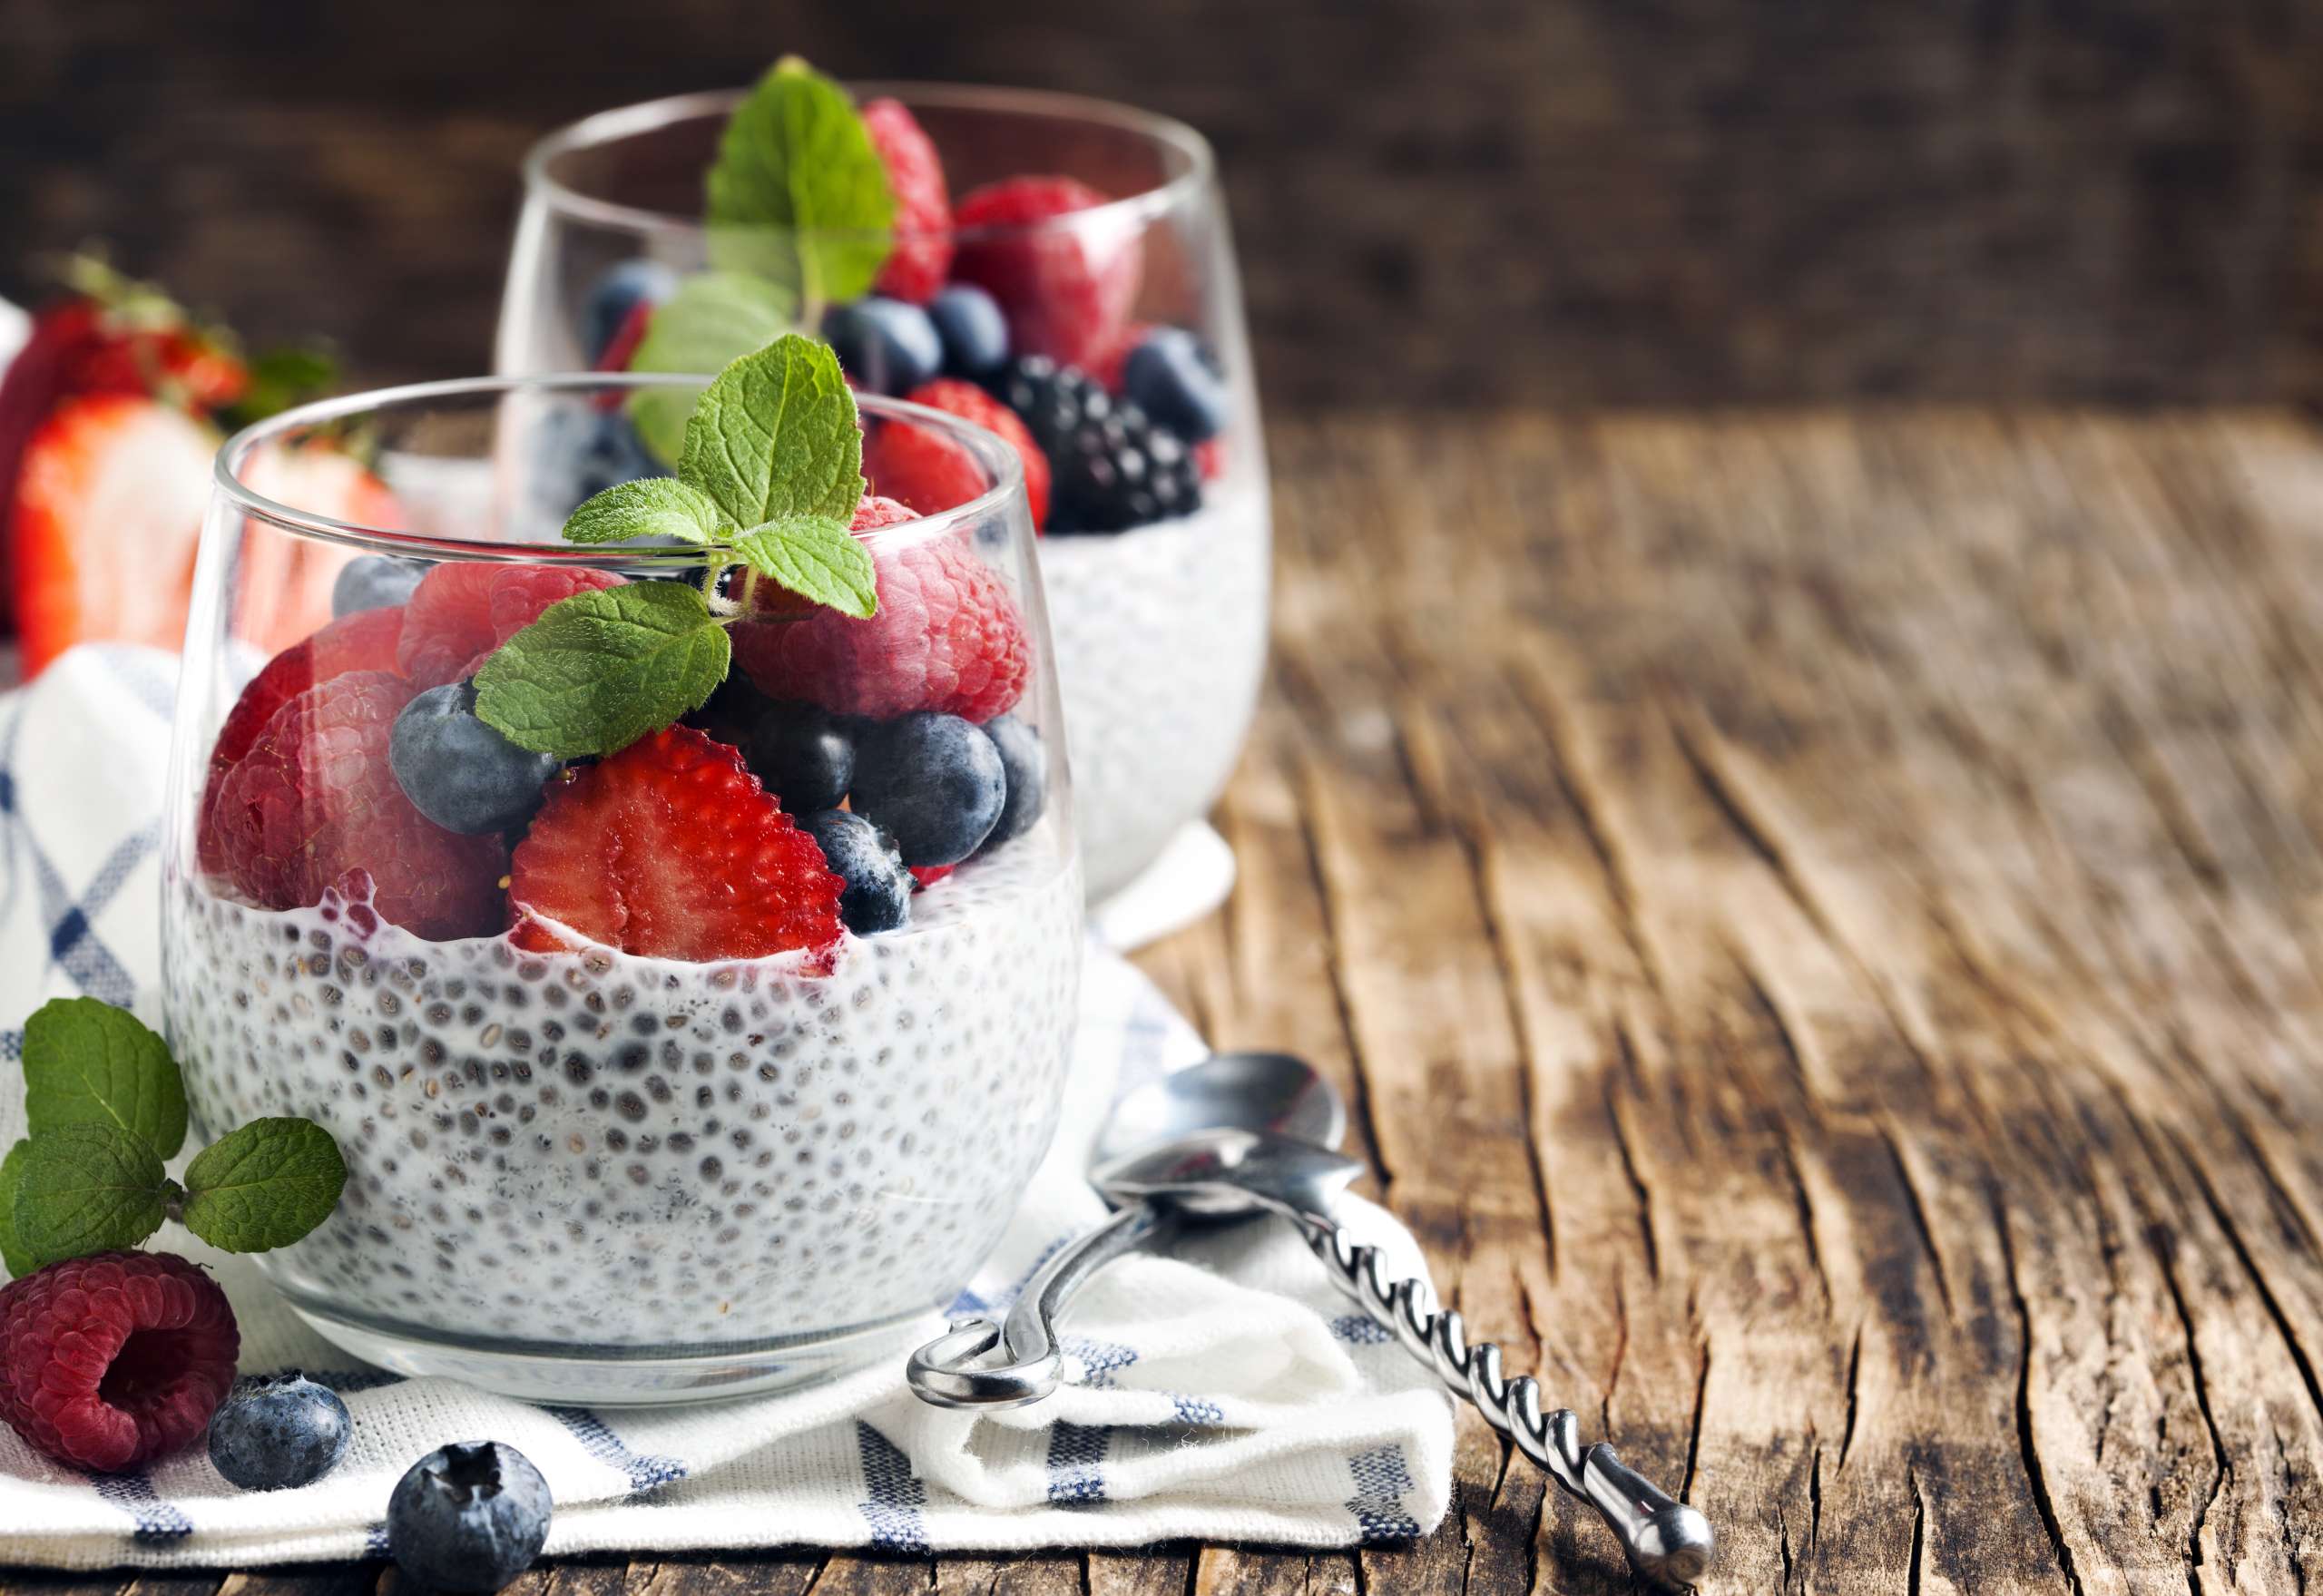 Chia seed pudding with berries- Gluten-Free Eating During Pregnancy